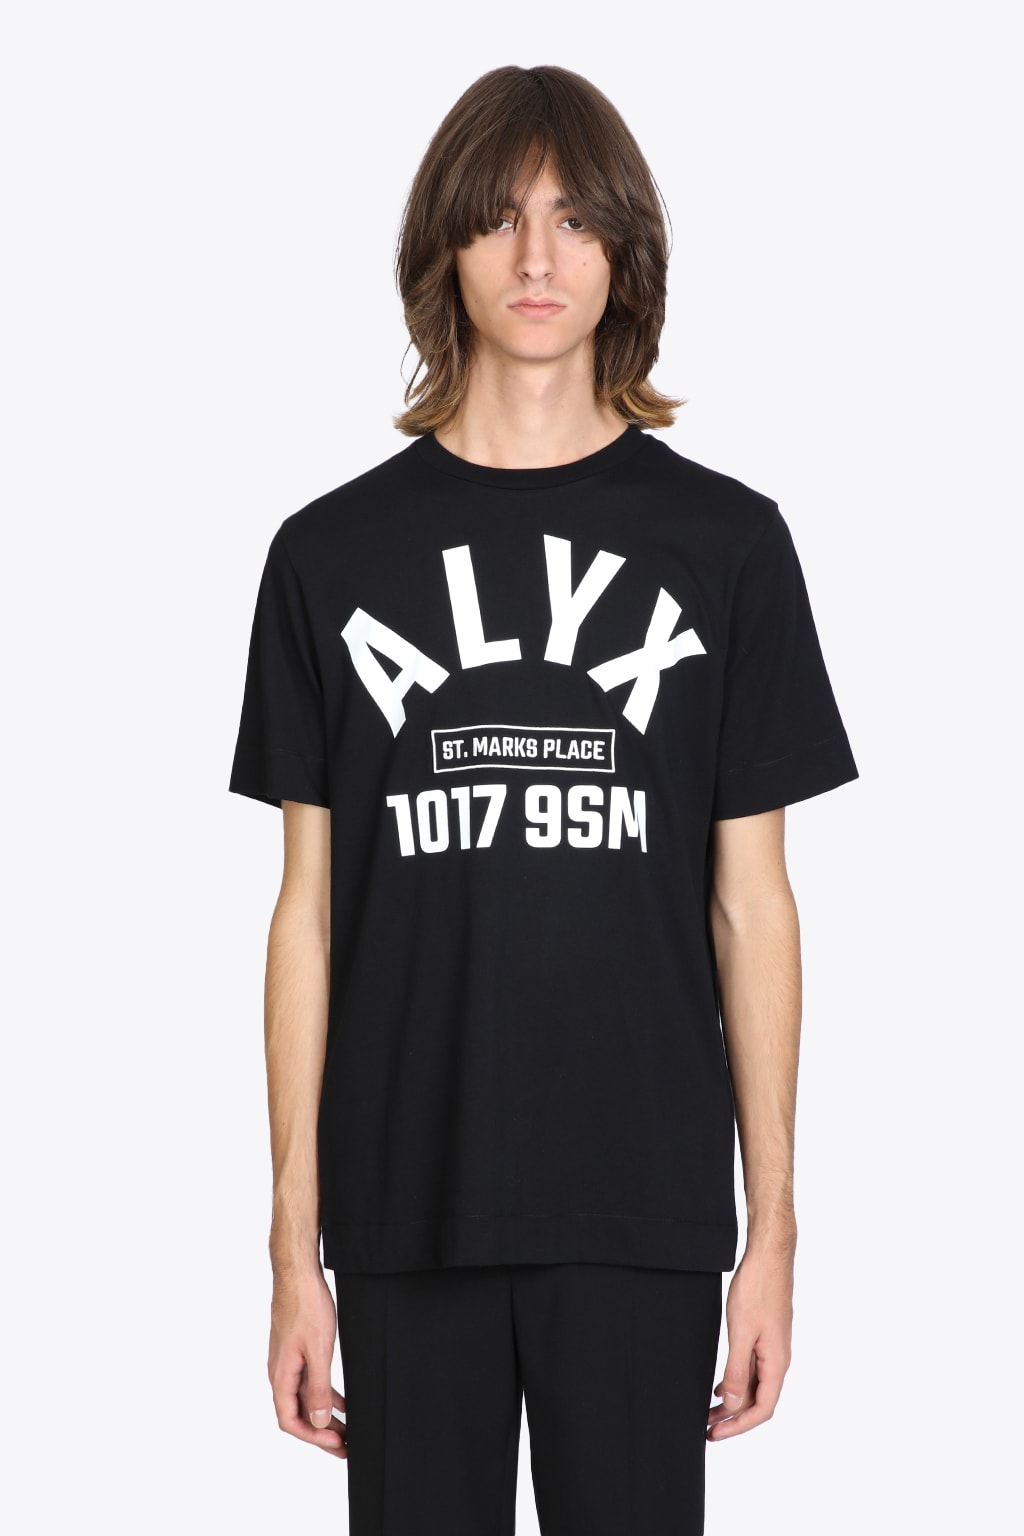 ALYX ARCH LOGO /S TEE BLACK T-SHIRT WITH FRONT LOGO - ARCH LOGO TEE